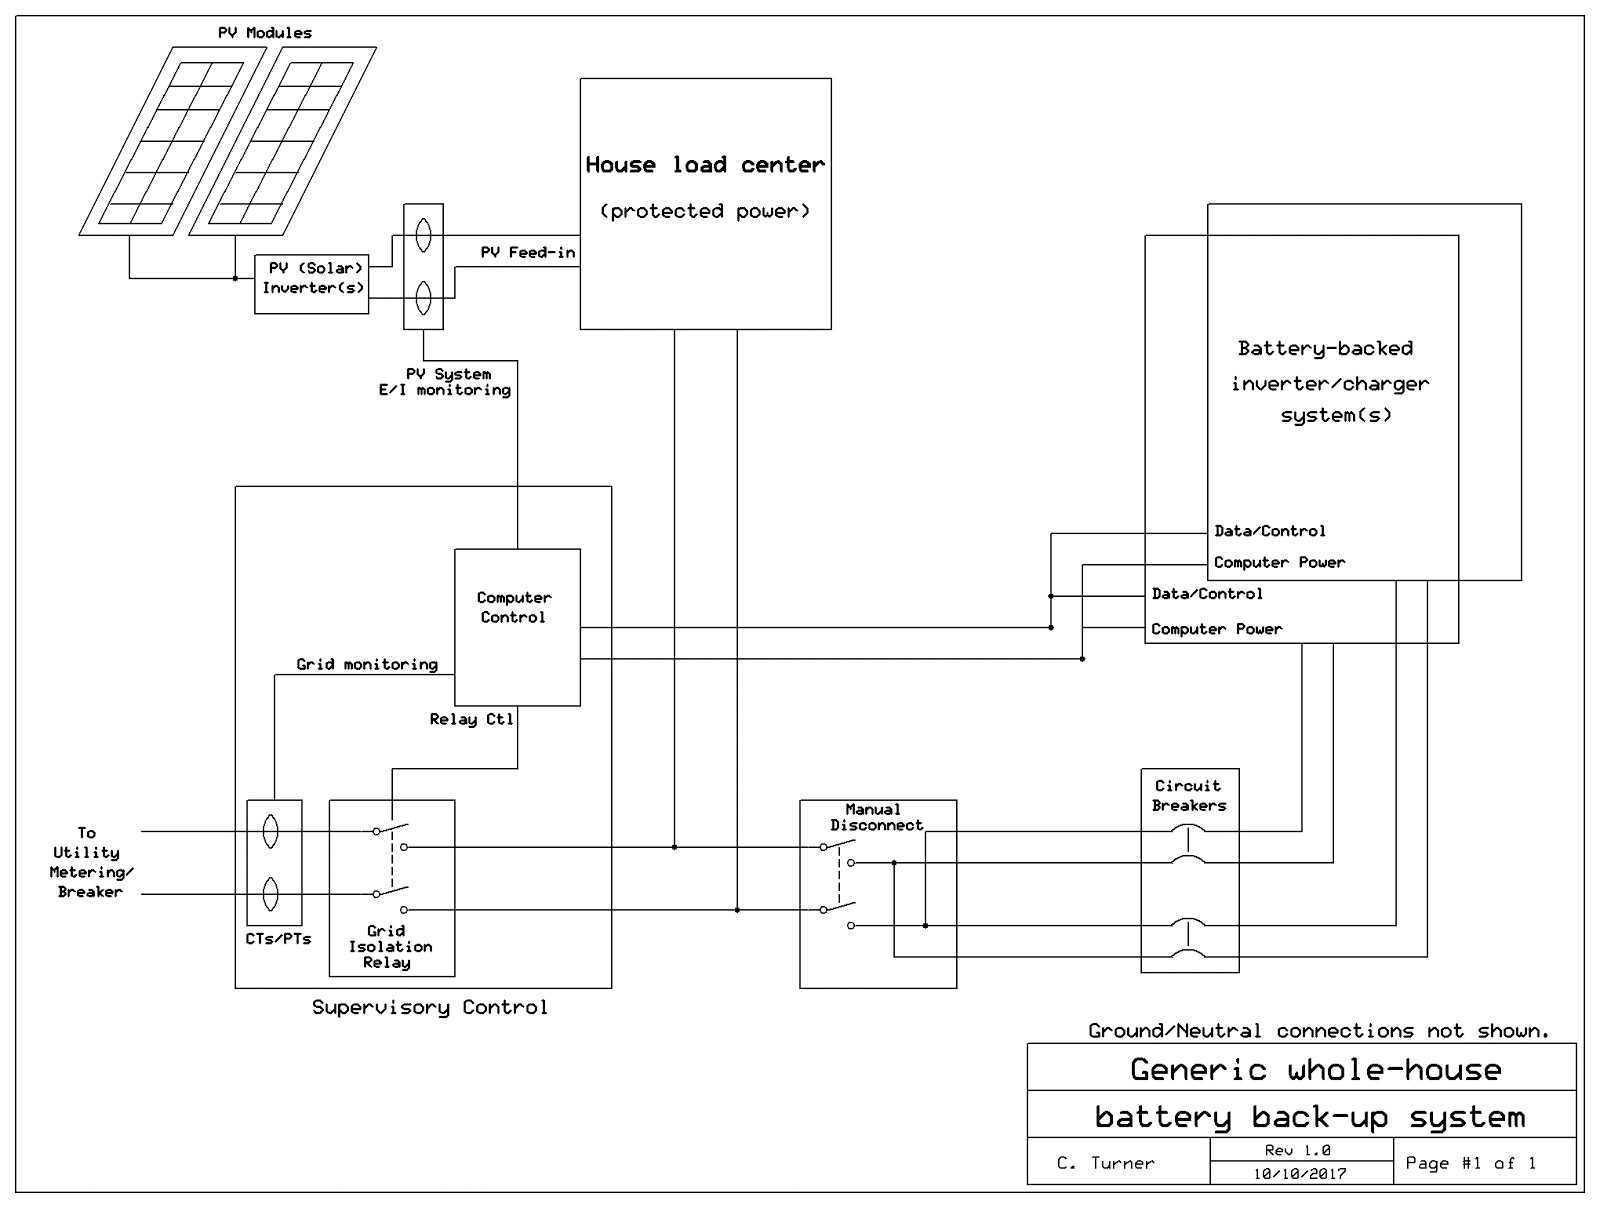 Figure 2 A generic block diagram of an "AC Battery" type of back up power system In "Tesla speak" the "Gateway" prises the functions depicted in the